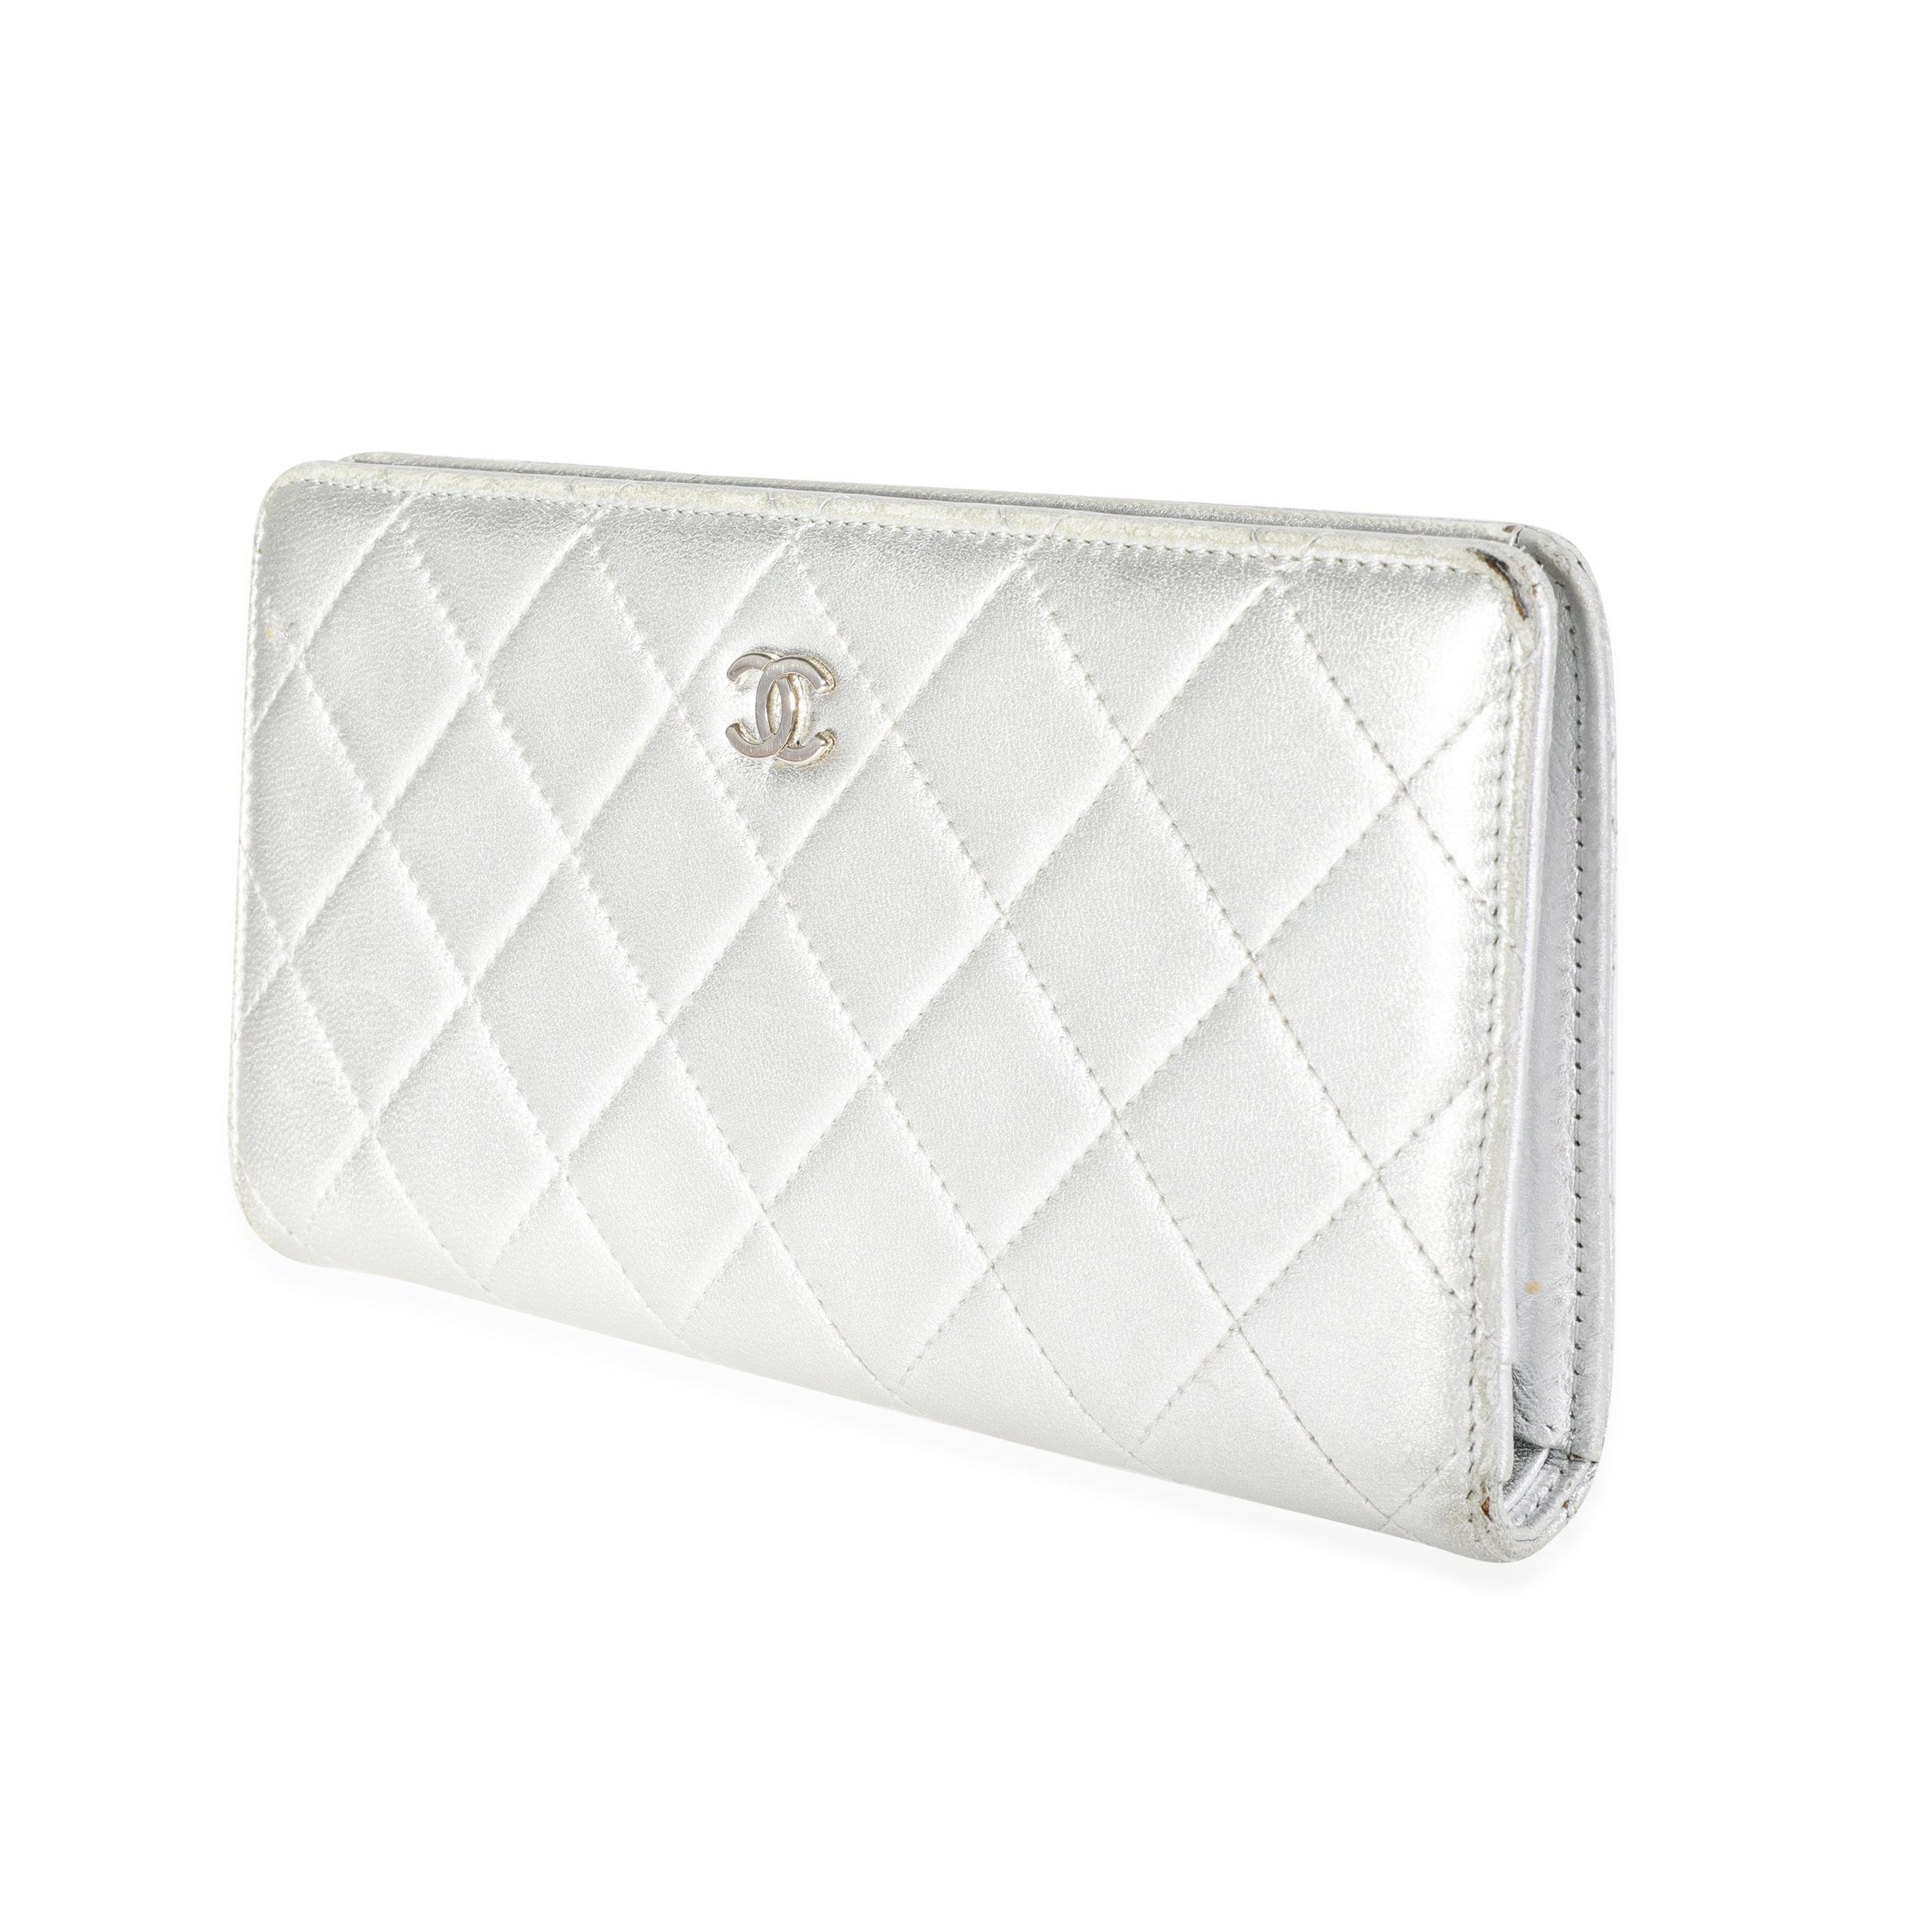 Chanel Chanel Metallic Silver Quilted Lambskin Leather CC L-Yen Wallet Size ONE SIZE - 2 Preview